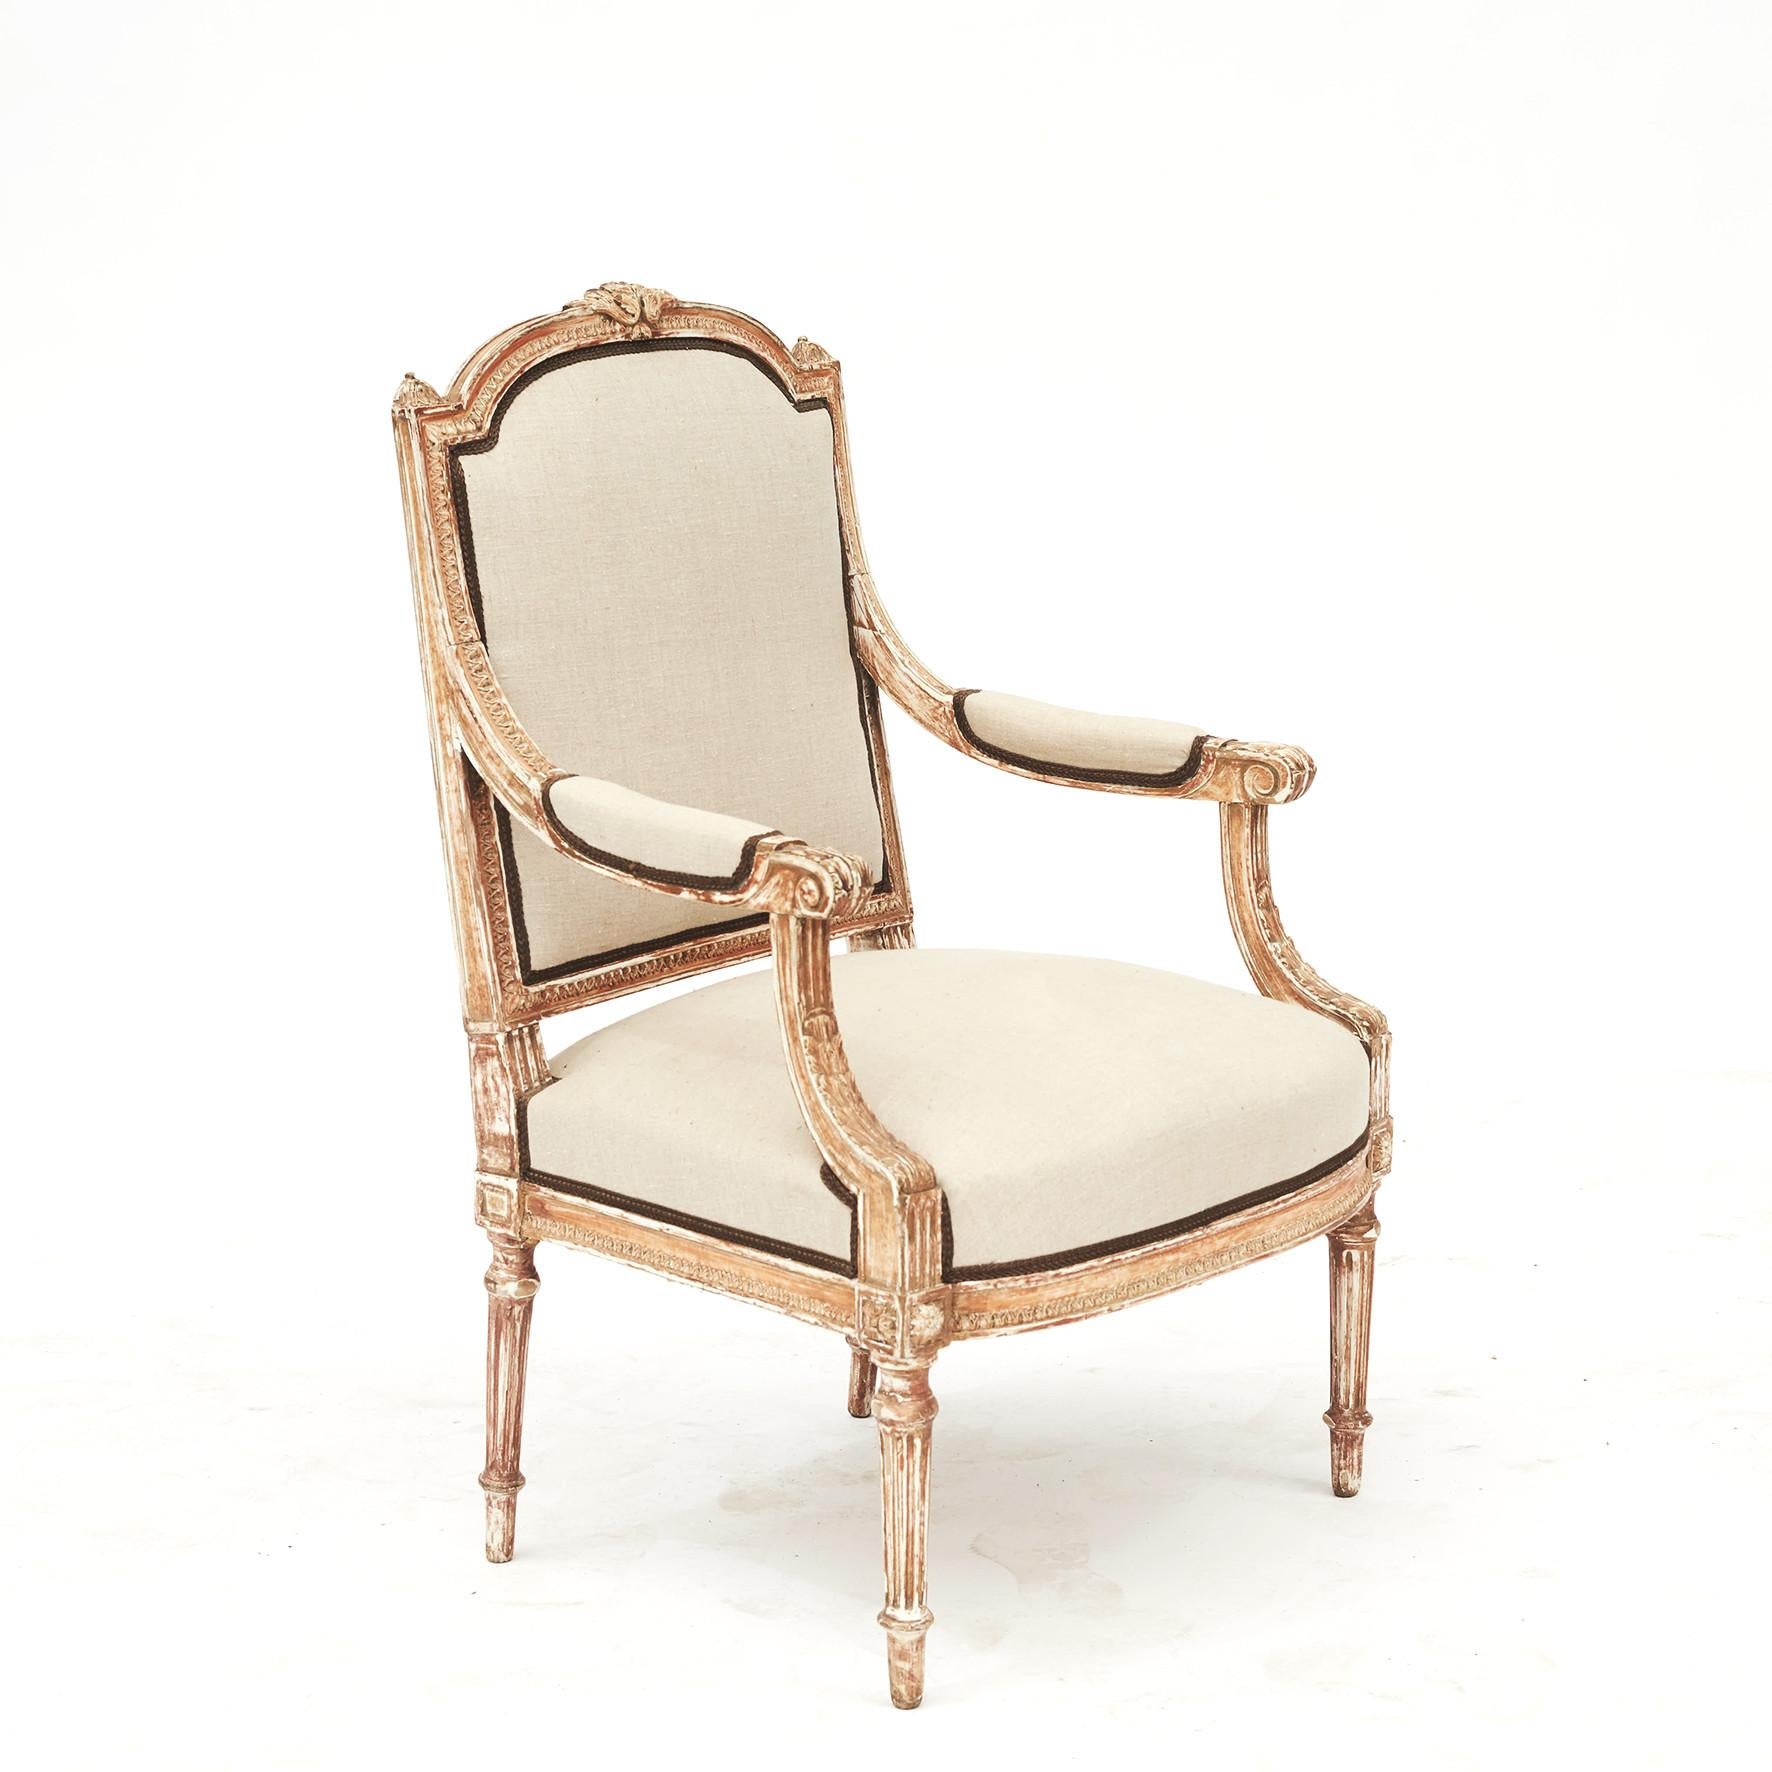 Louis XVI style armchair, c. 1860.
Original undercoat paint with good patina.
Newly upholstered in gray canvas fabric.
France approx. 1860.